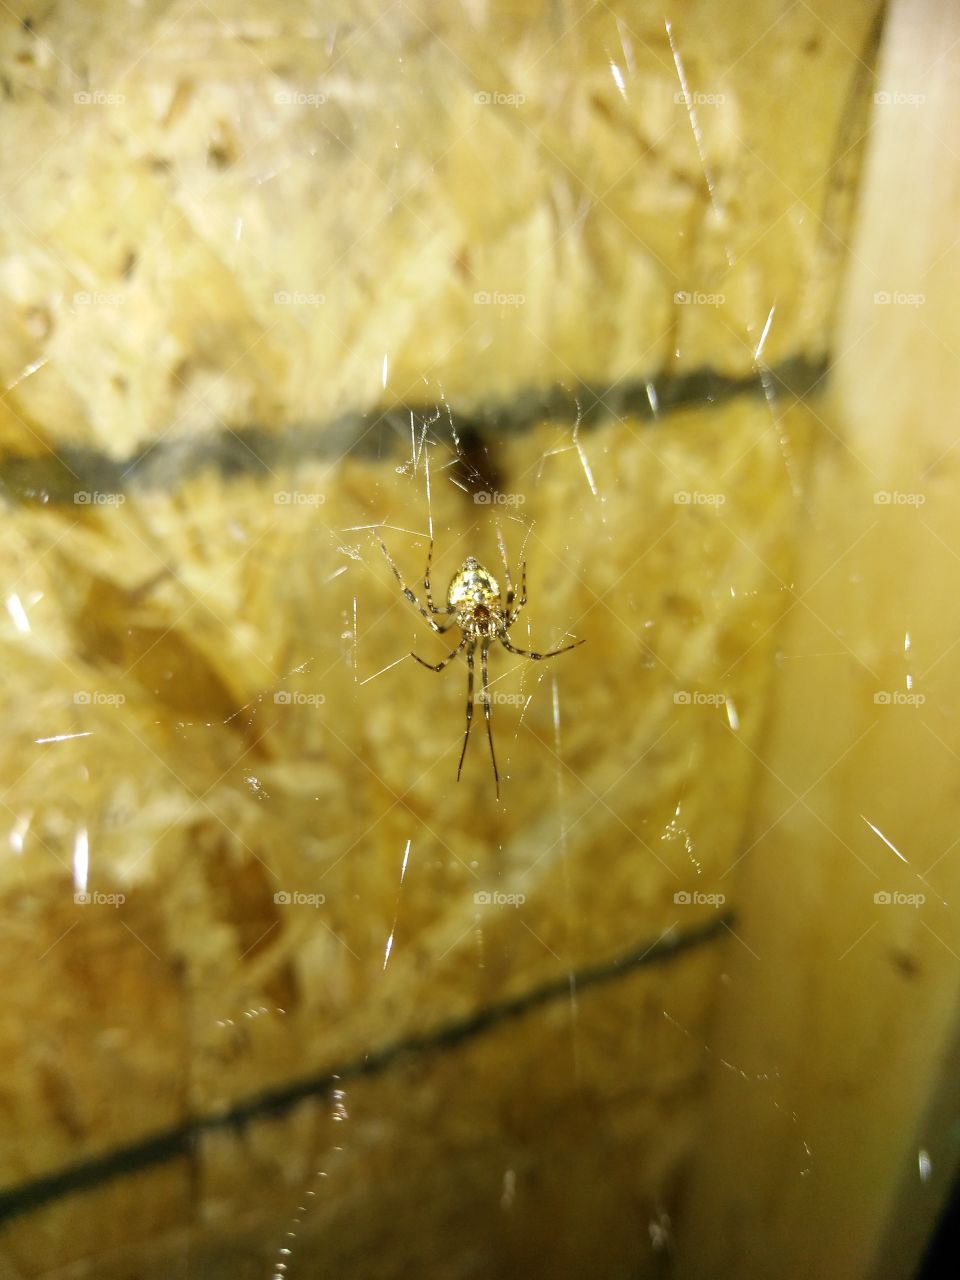 spider In shed